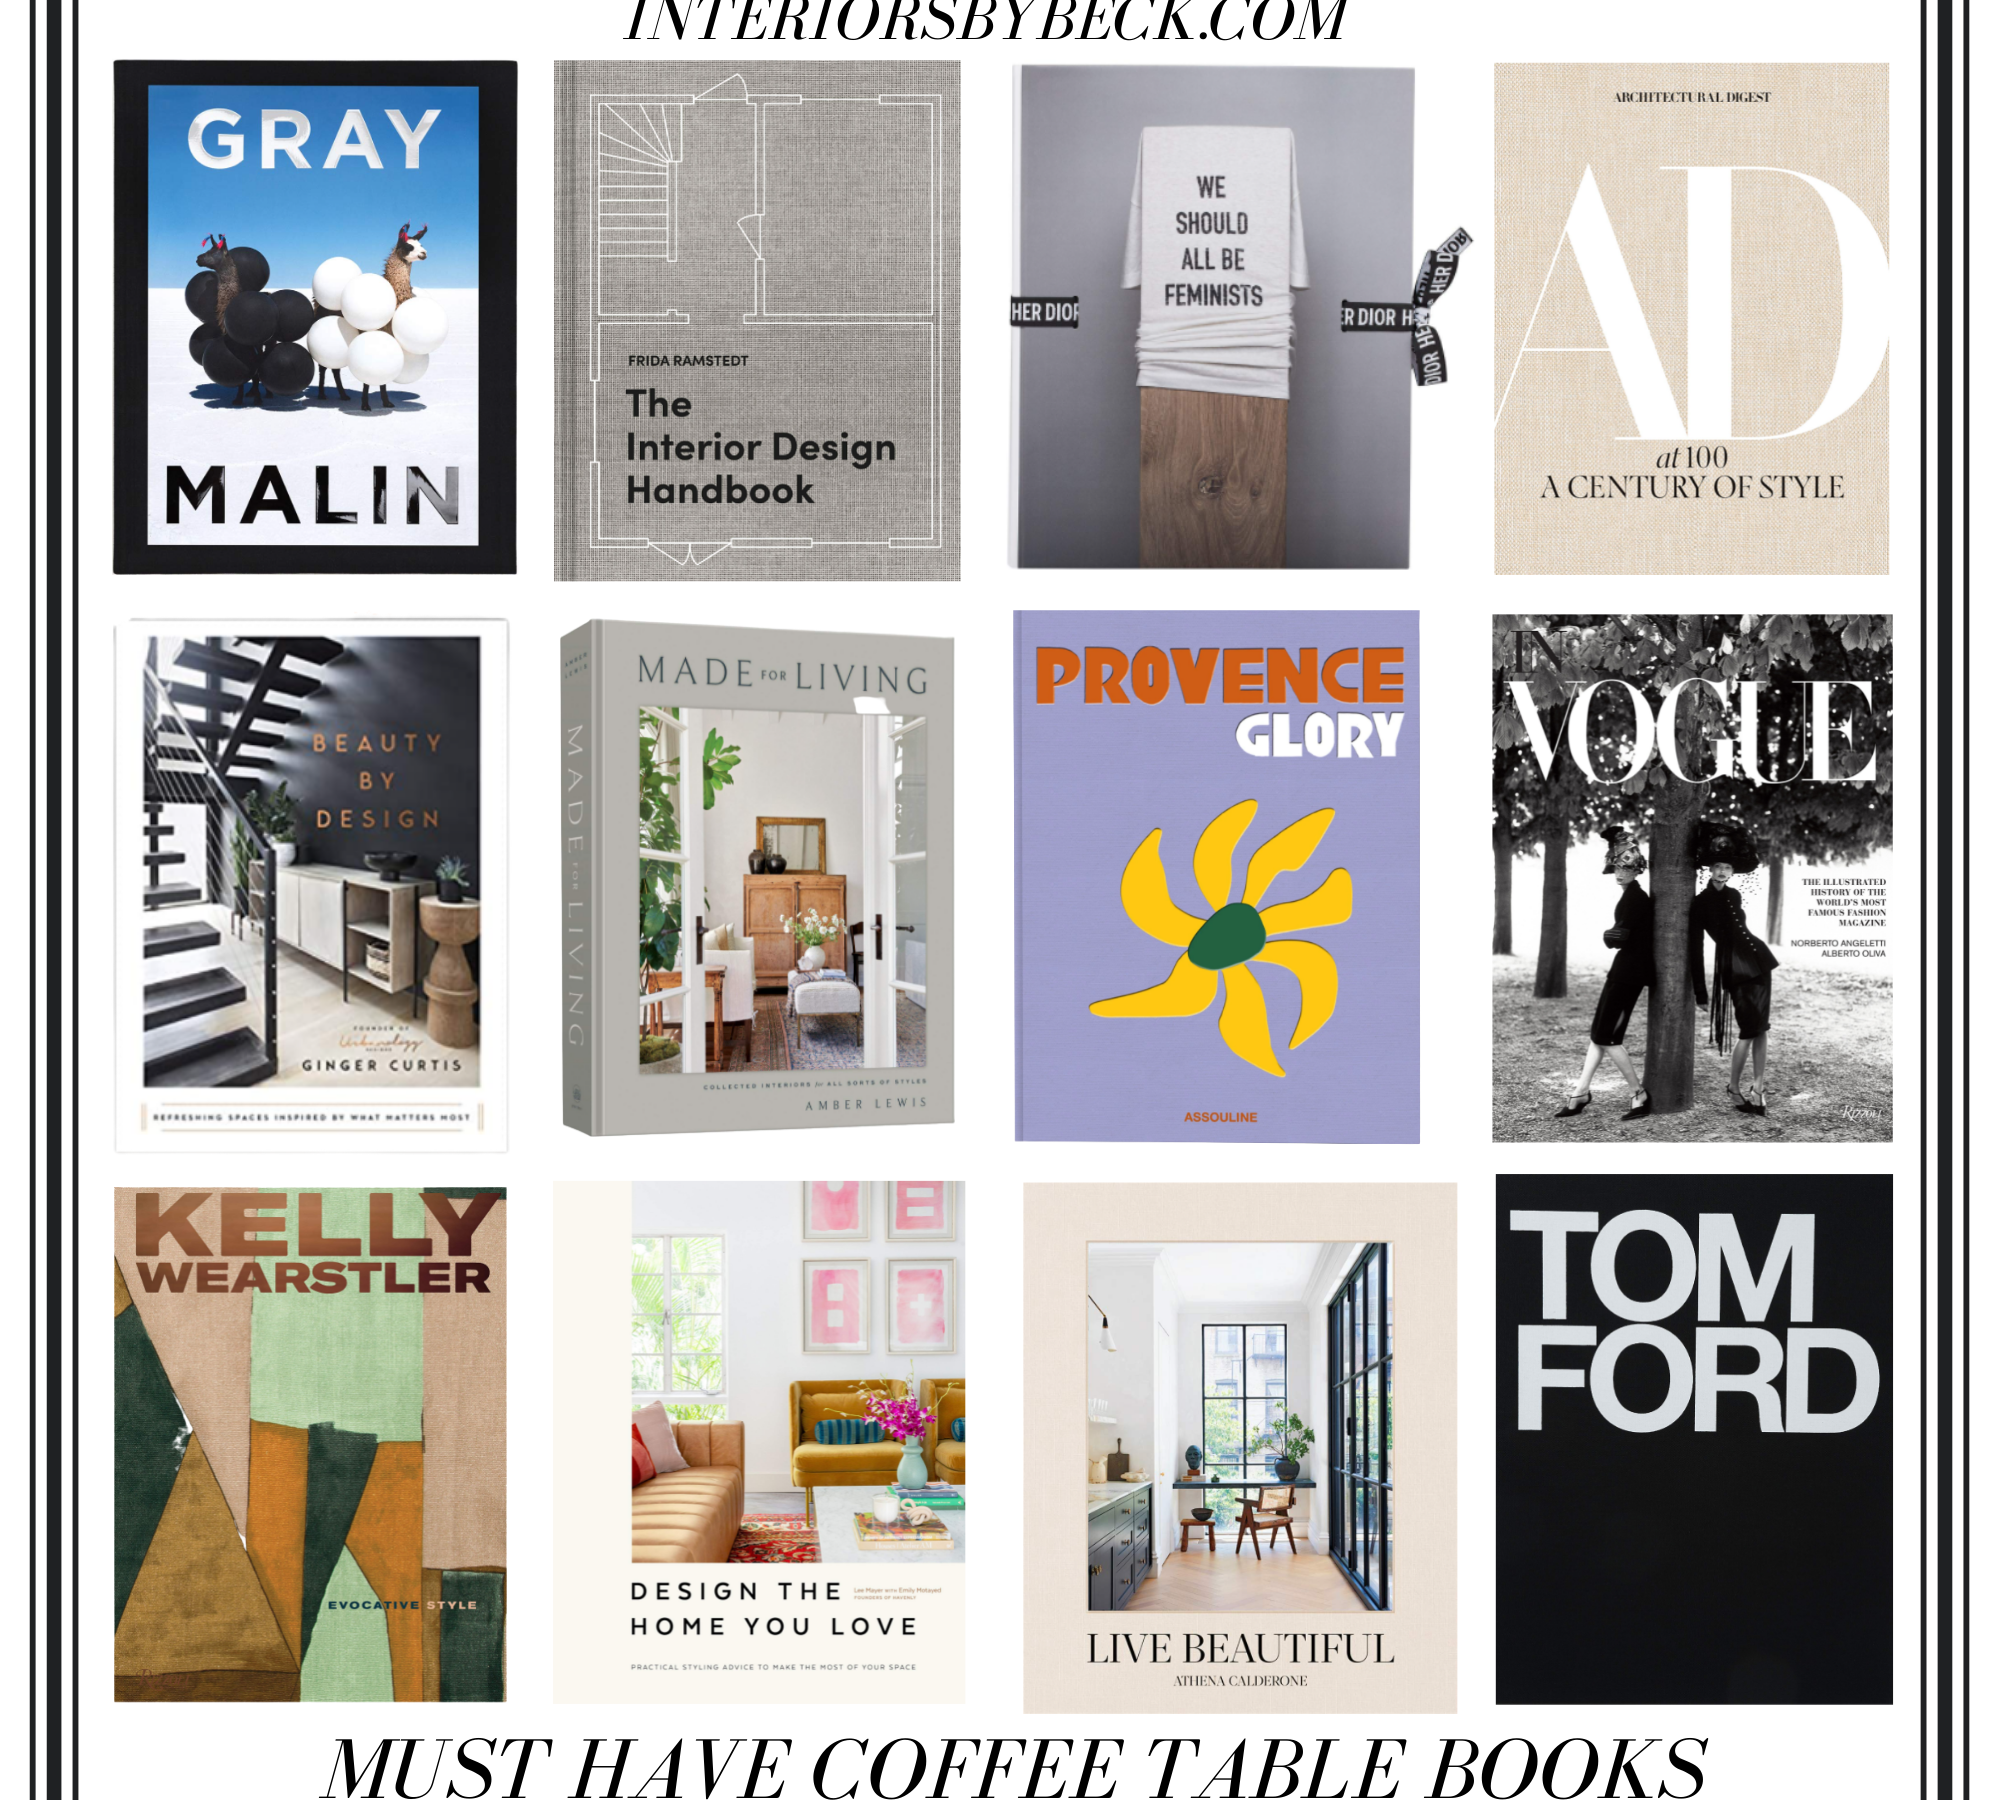 MUST HAVE COFFEE TABLE BOOKS – INTERIORS BY BECK